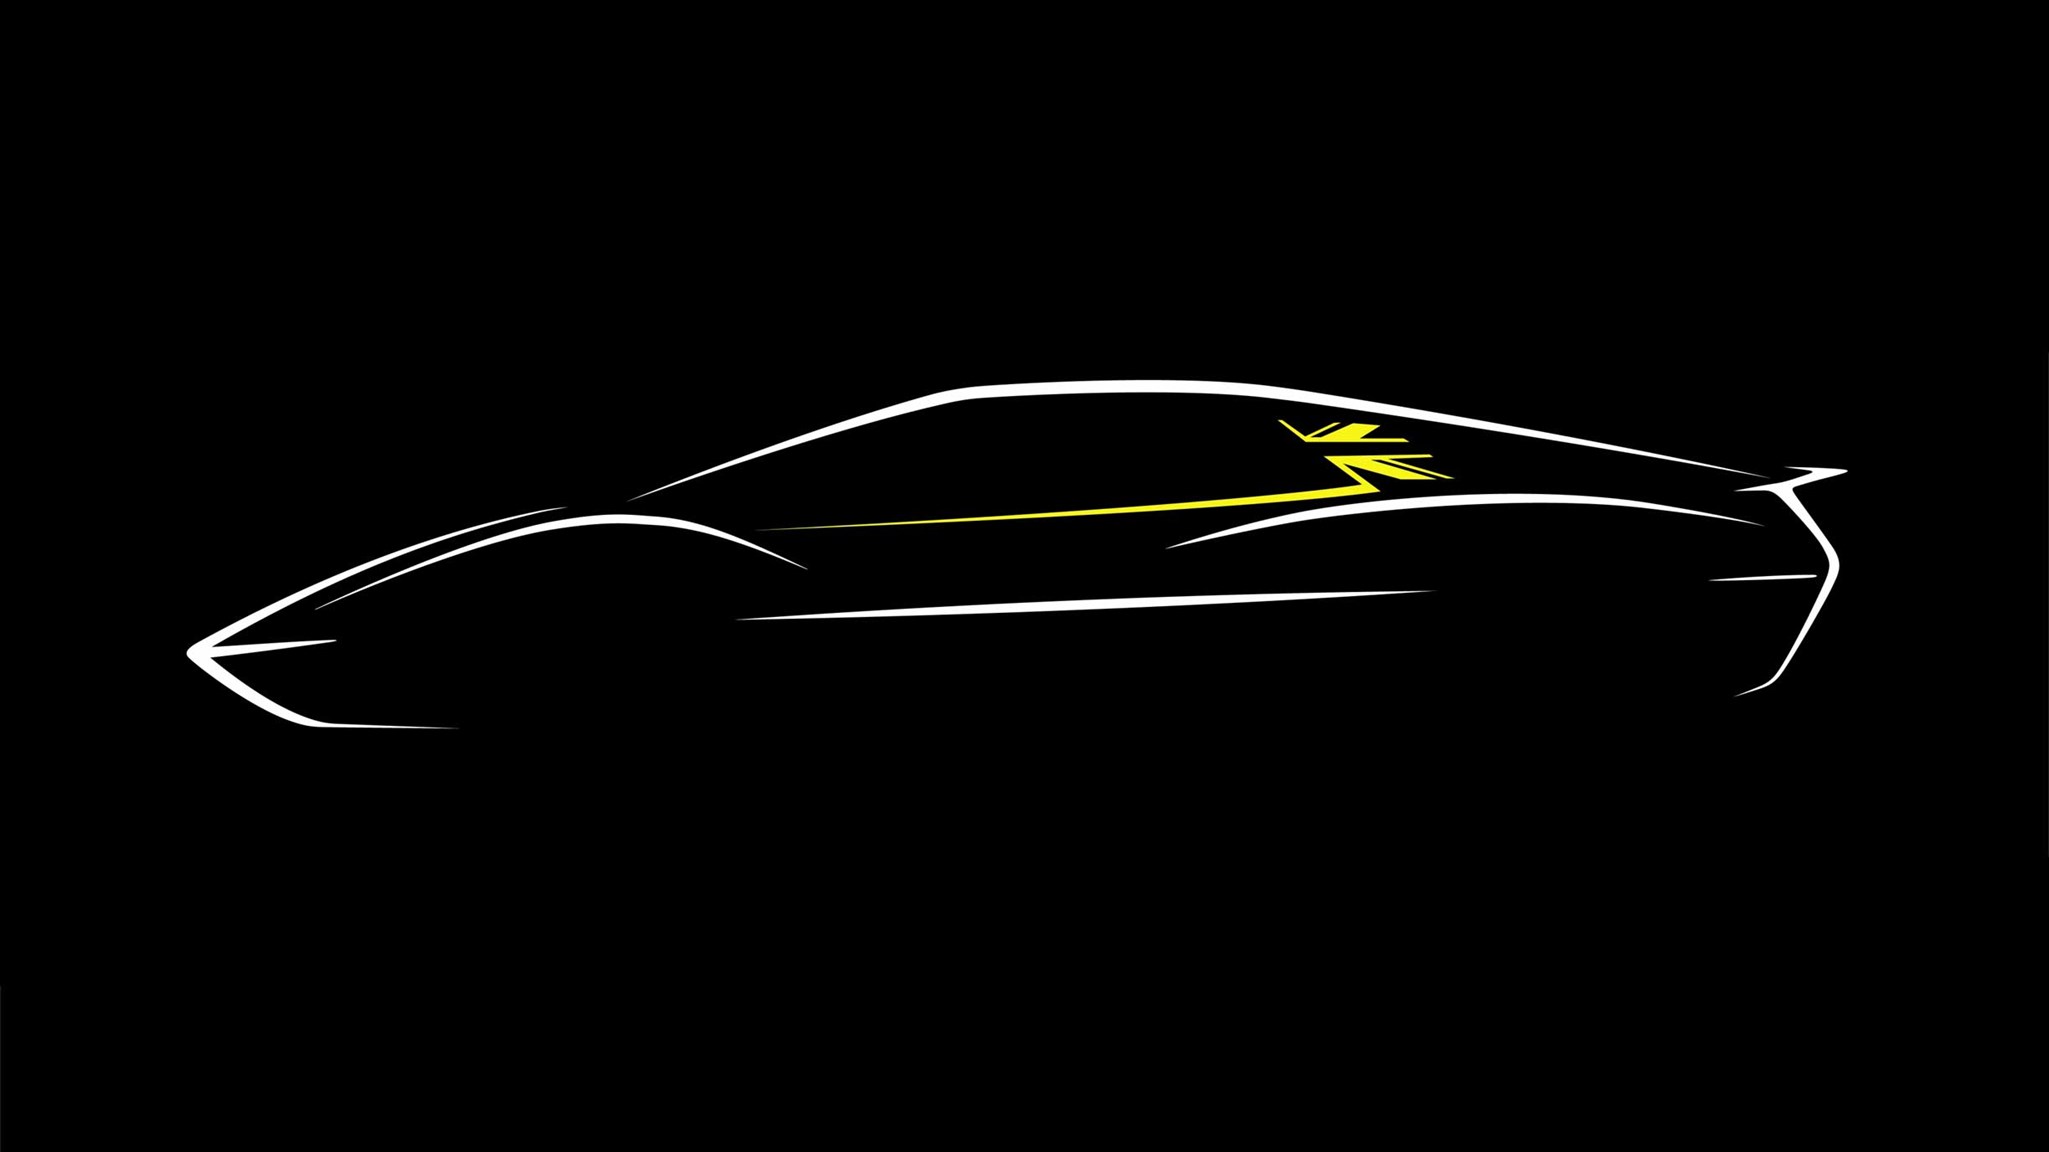 Lotus electric: sports cars, SUVs and saloons planned by 2025 | CAR Magazine